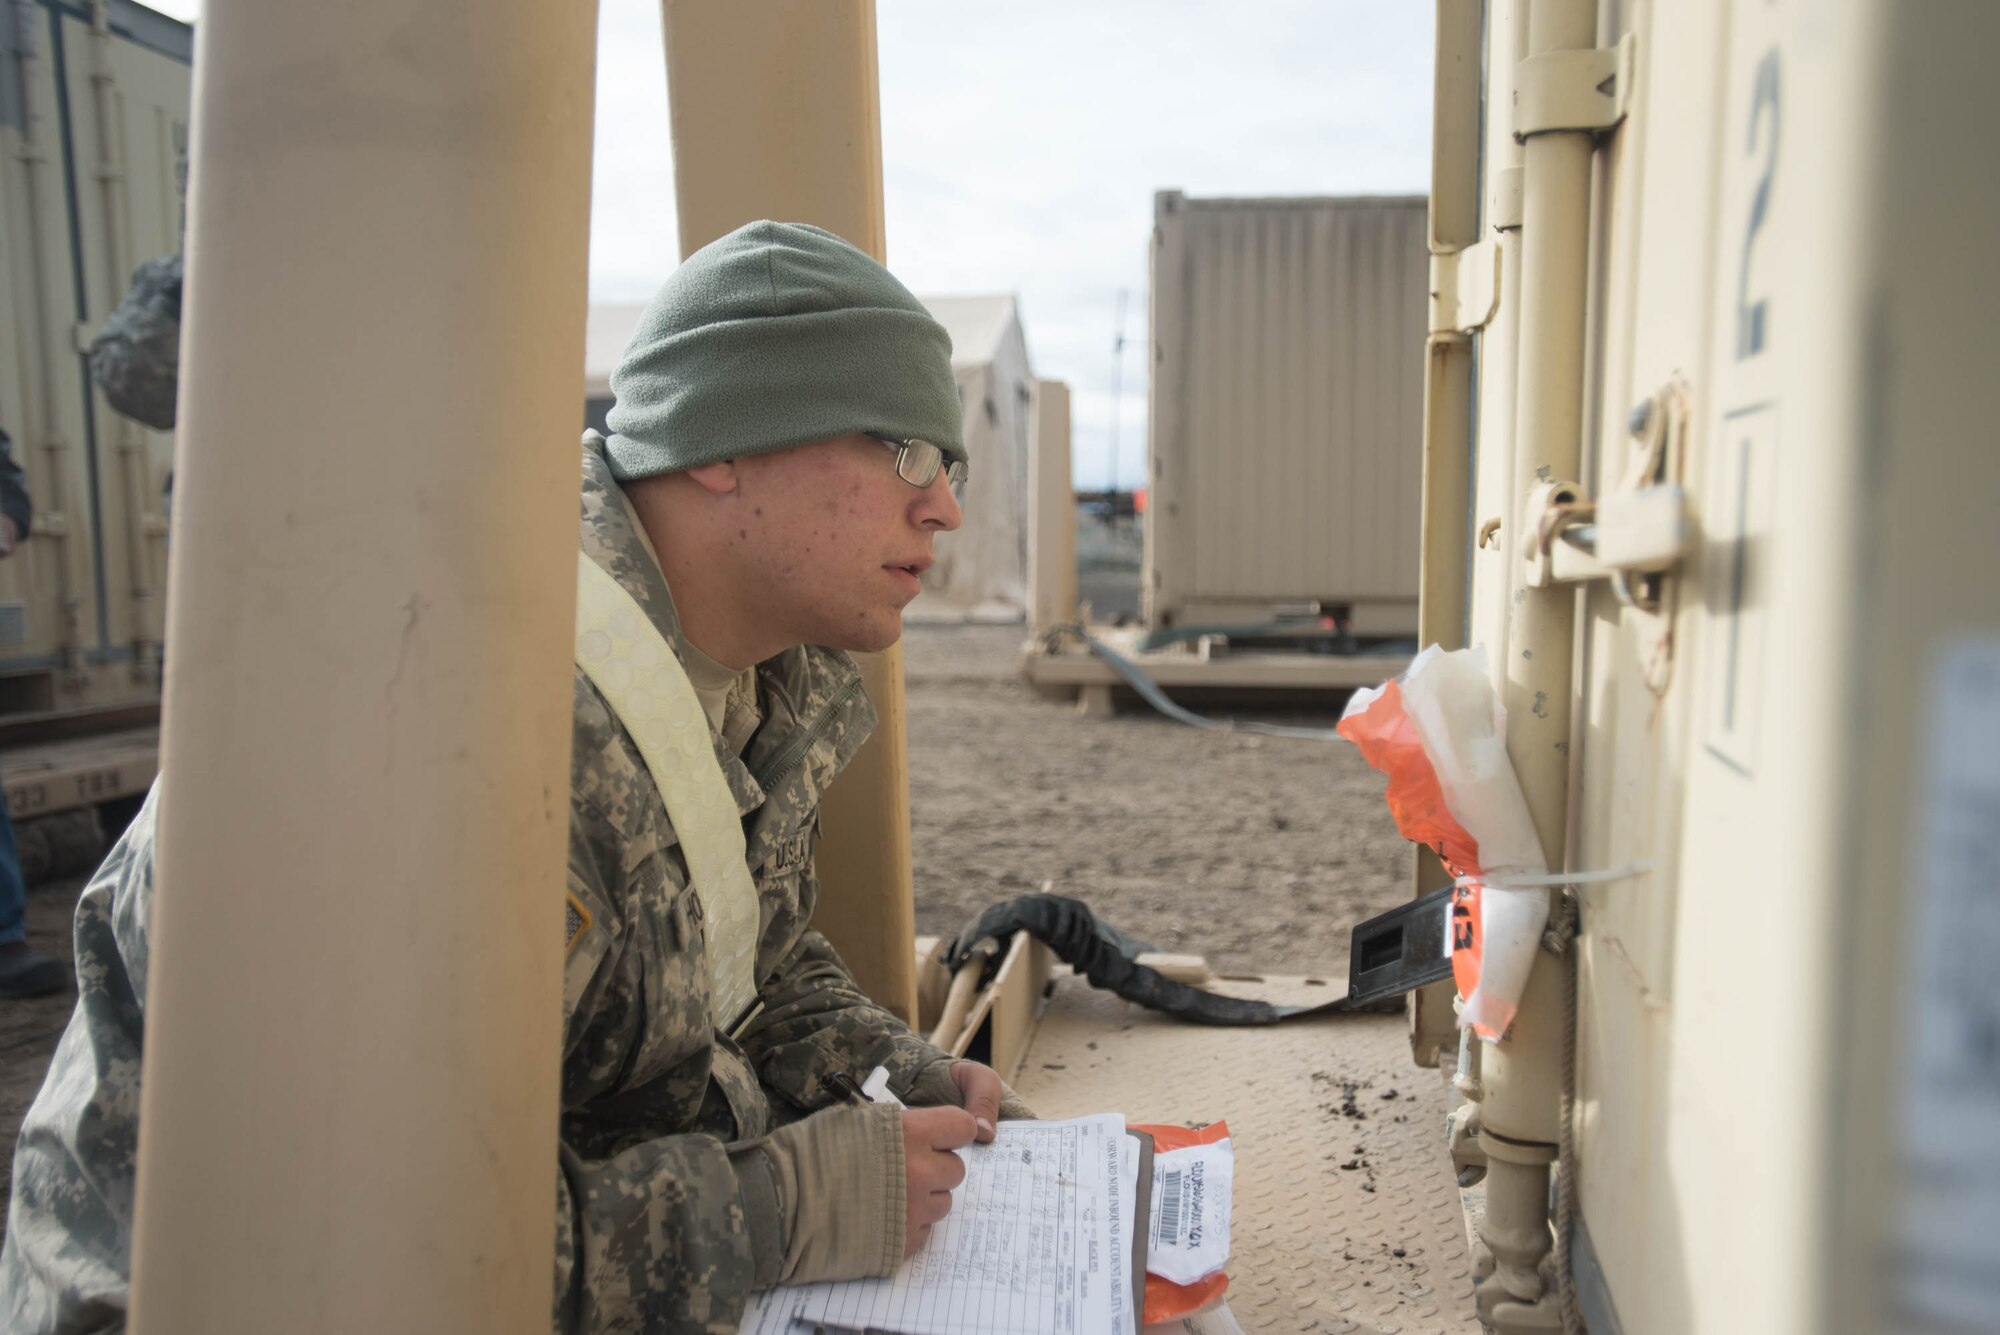 Soldiers from the U.S. Army’s 688th Rapid Port Opening Element move cargo at the forward operating node at Amedee Army Airfield, Calif., on March 9, 2016. The 688th RPOE is working in conjunction with the Kentucky Air National Guard’s 123rd Contingency Response Group and a team from the DU.S. Army Spc. Travis Hoffman, a transportation management coordinator for the 688th Rapid Port Opening Element, documents the arrival of cargo at the forward operating node at Amedee Army Airfield, Calif., on March 9, 2016. The 688th RPOE is working in conjunction with the Kentucky Air National Guard’s 123rd Contingency Response Group and a team from the Defense Logistics Agency to operate Joint Task Force-Port Opening Sangala during a week-long exercise called Operation Lumberjack. The objective of the JTF-PO is to establish an aerial port of debarkation, provide initial distribution capability and set up warehousing for distribution beyond the forward node. (Kentucky Air National Guard photo by Master Sgt. Phil Speck)efense Logistics Agency to operate Joint Task Force-Port Opening Sangala during a week-long exercise called Operation Lumberjack. The objective of the JTF-PO is to establish an aerial port of debarkation, provide initial distribution capability and set up warehousing for distribution beyond the forward node. (Kentucky Air National Guard photo by Master Sgt. Phil Speck)